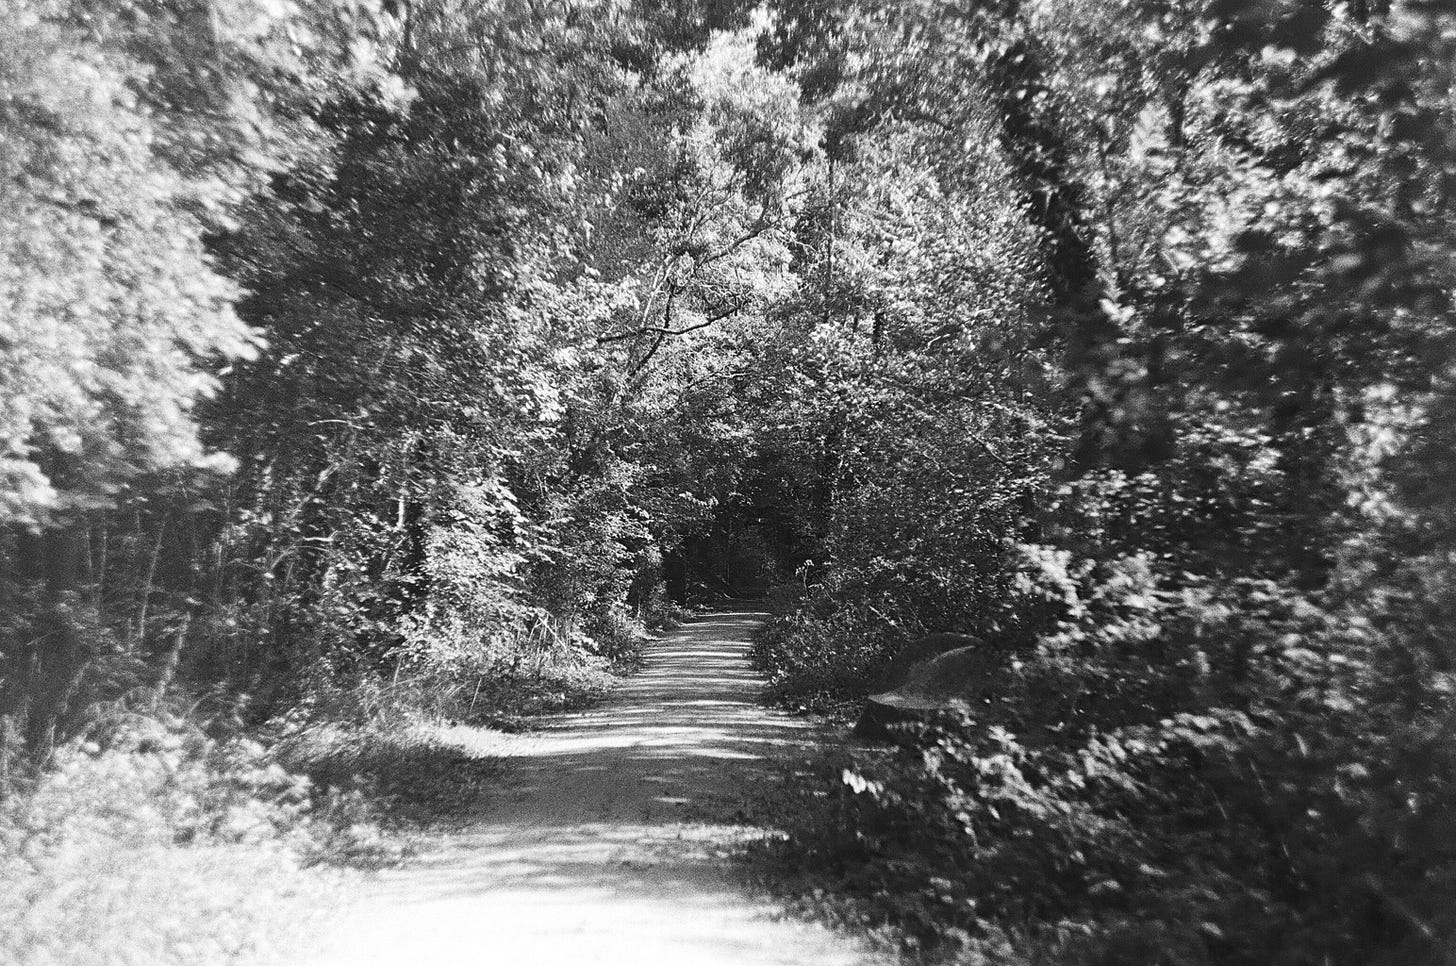 black and white grainy photograph of a shadow-striped forest path, the closer trees blurred, focus drawing into the depths